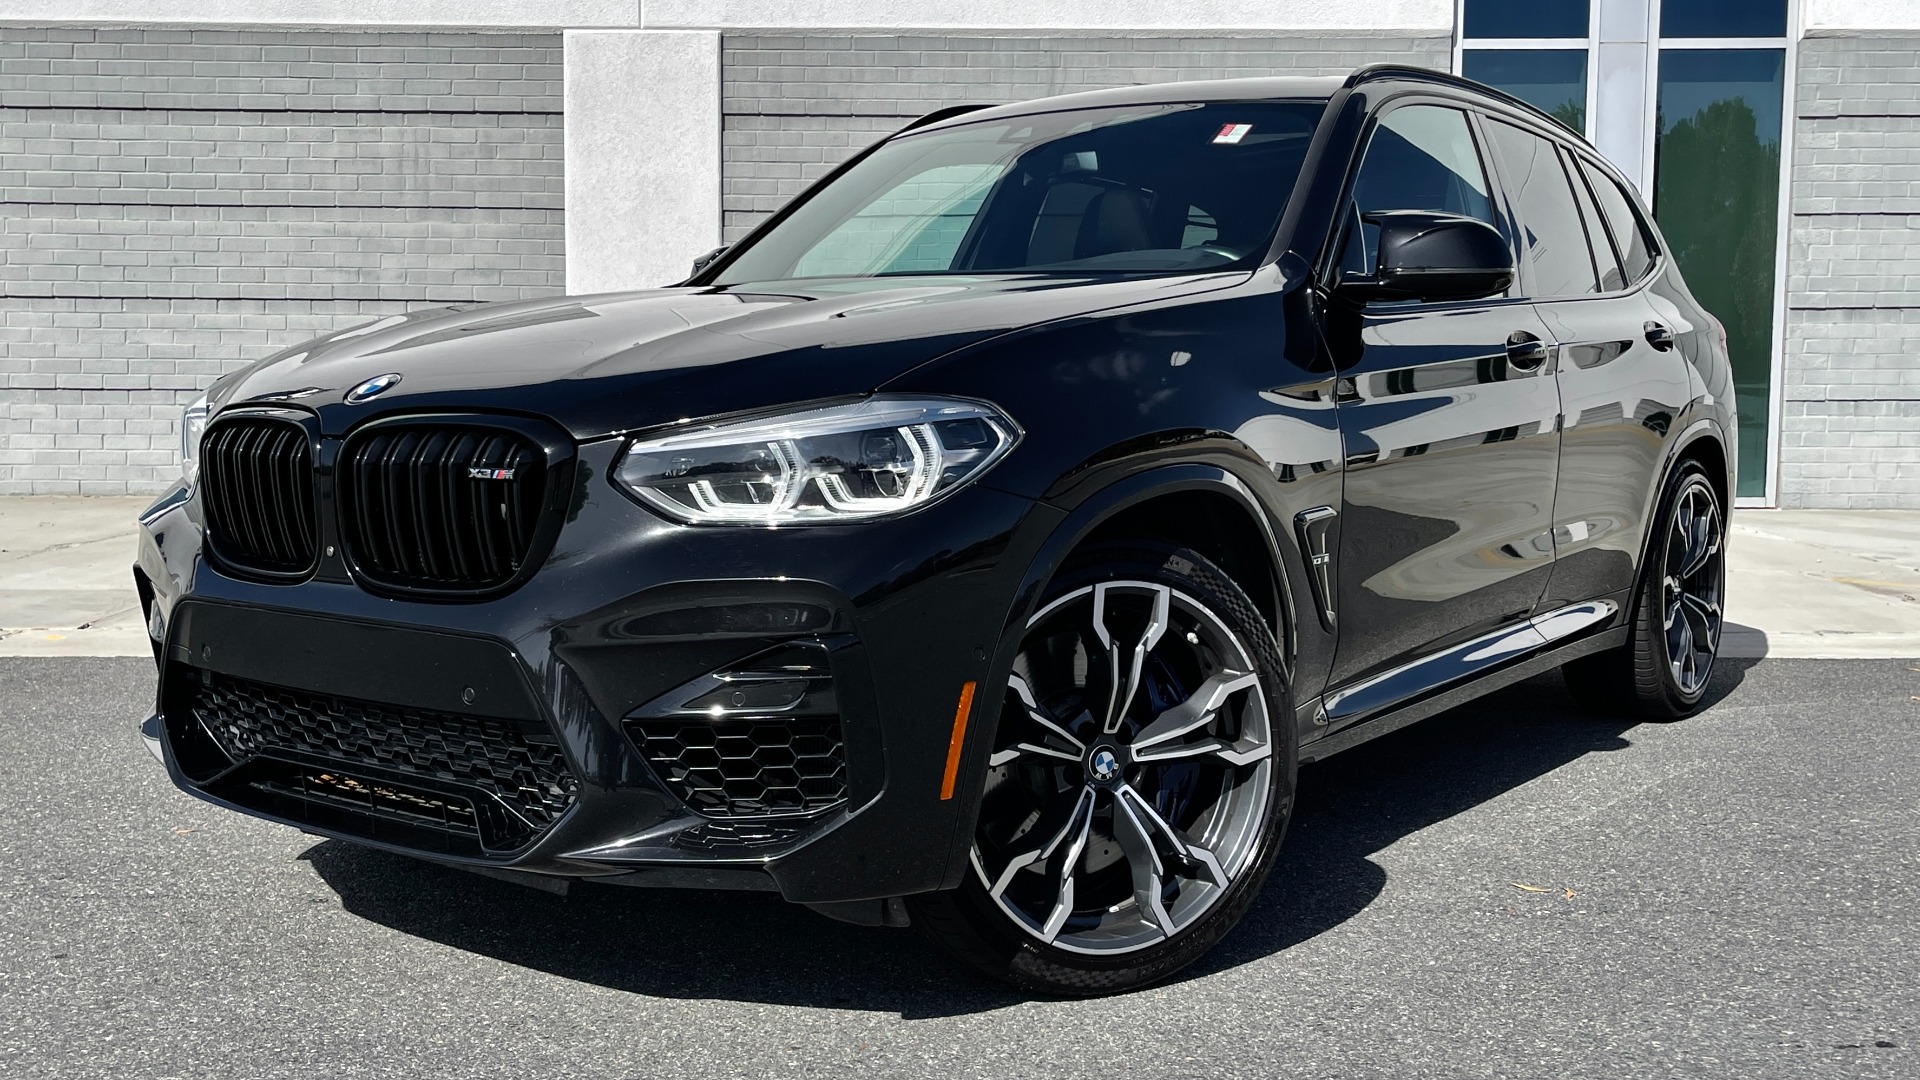 Used 2020 BMW X3 M MERINO LEATHER / EXECUTIVE PACKAGE / DINAN EXHAUST for sale $58,999 at Formula Imports in Charlotte NC 28227 1